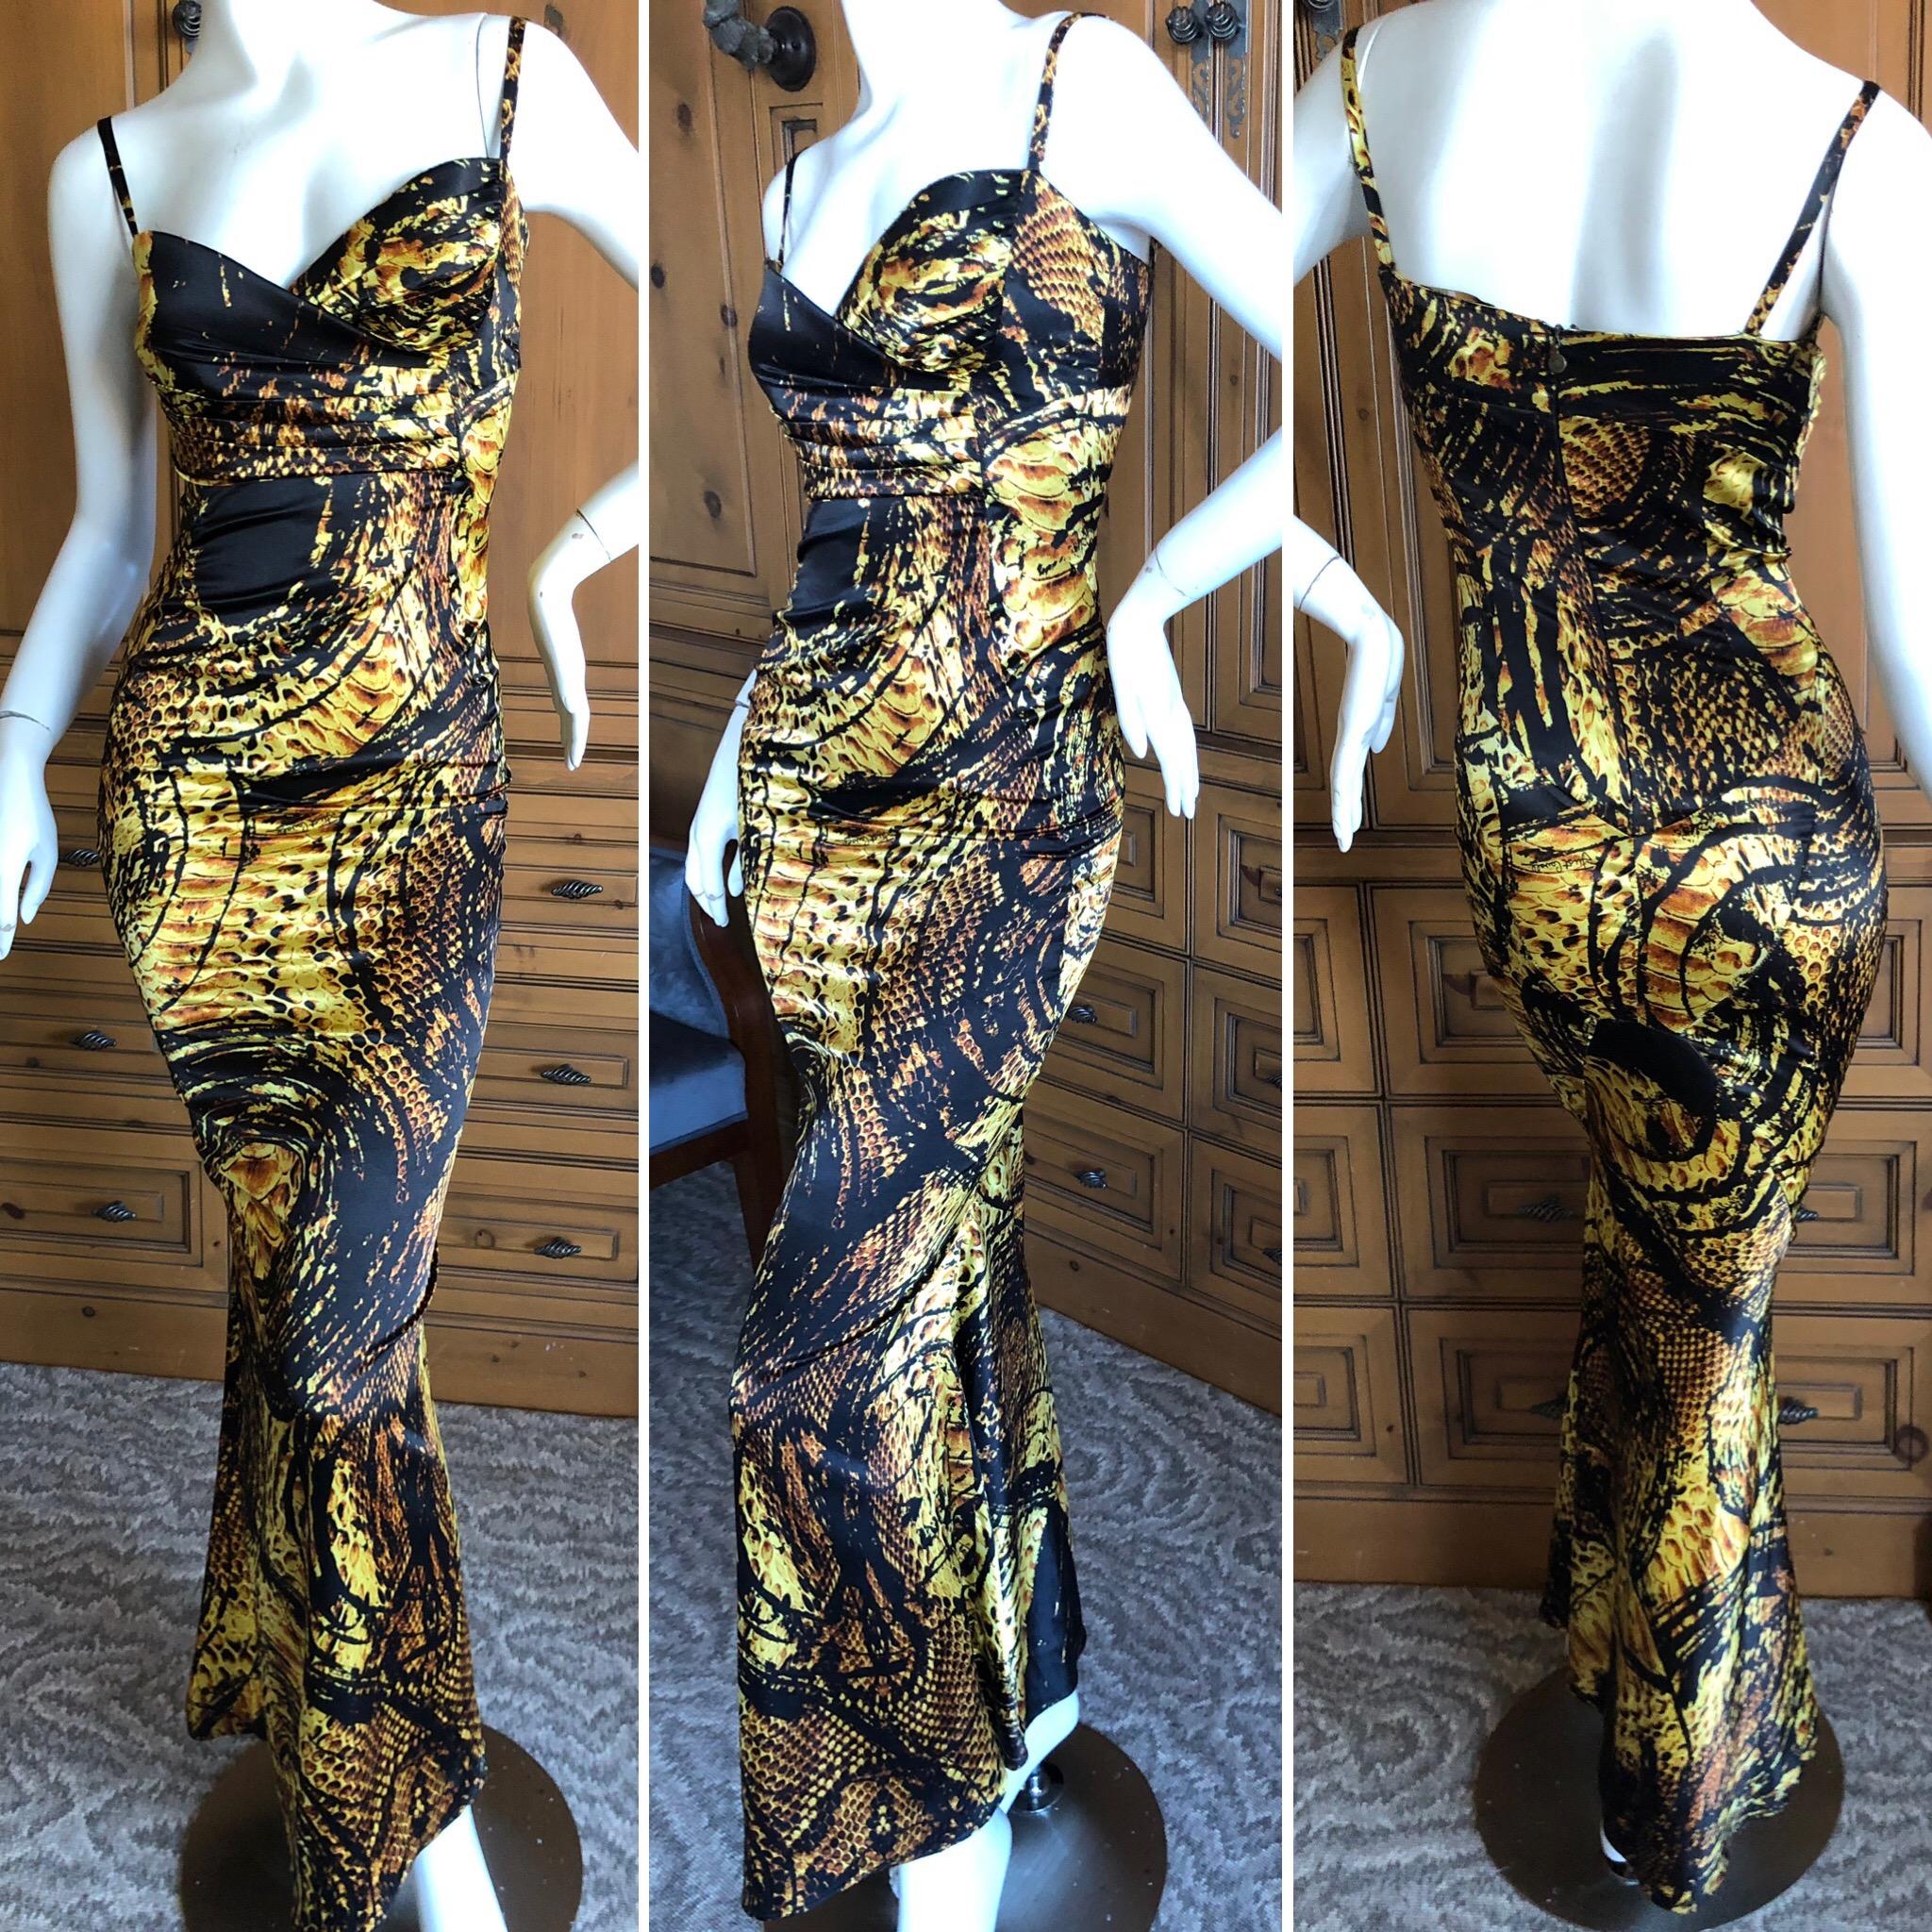 Roberto Cavalli Gold Reptile Print Evening Dress for Just Cavalli

Size 38, but runs small
 Bust 34